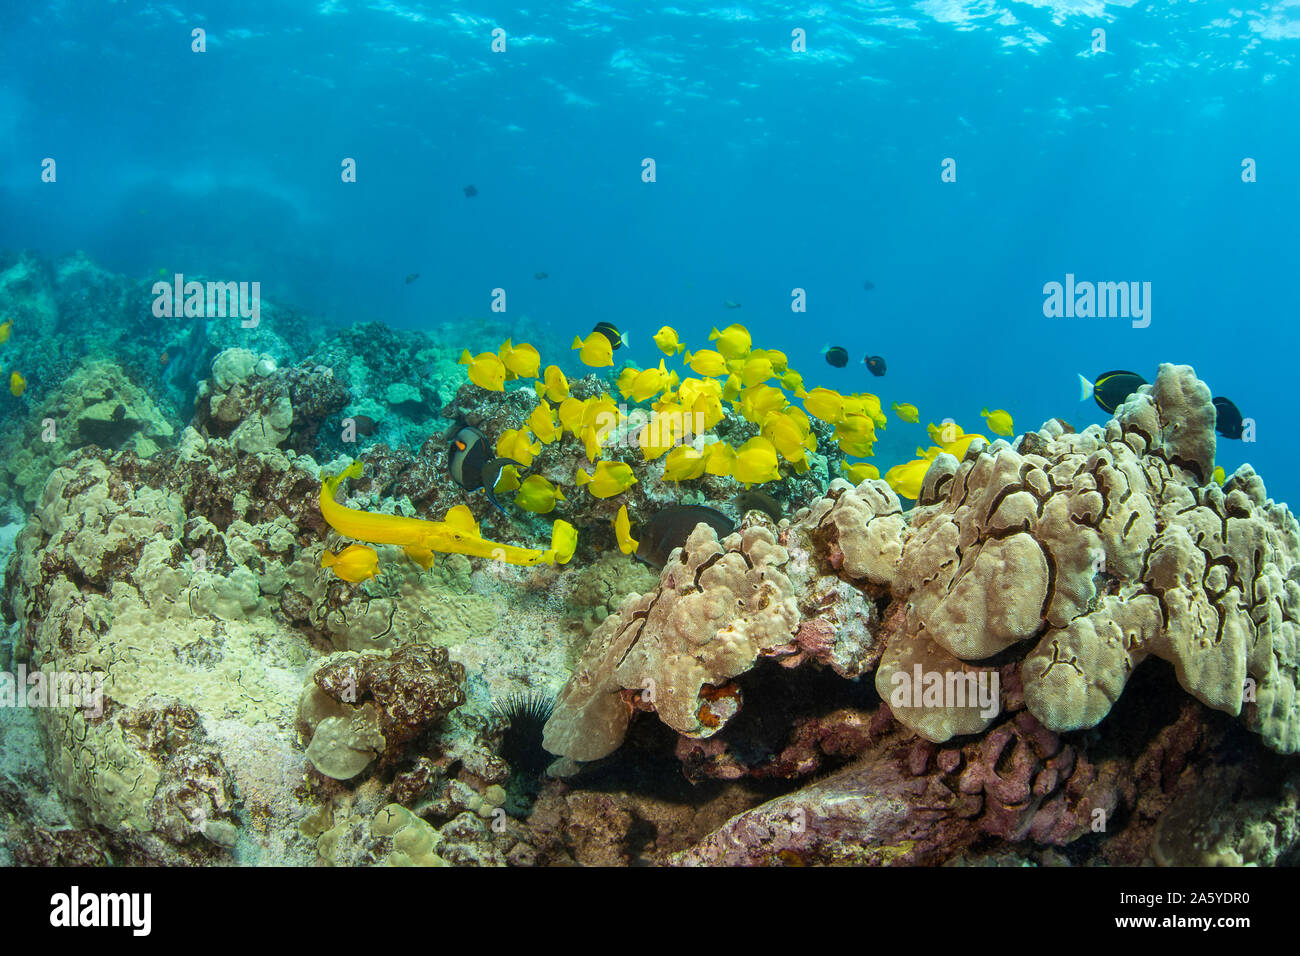 The yellow trumpetfish, Aulostomus chinensis, is attempting to use this school of yellow tang, Zebrasoma flavescens, as camouflage to prey on a confus Stock Photo